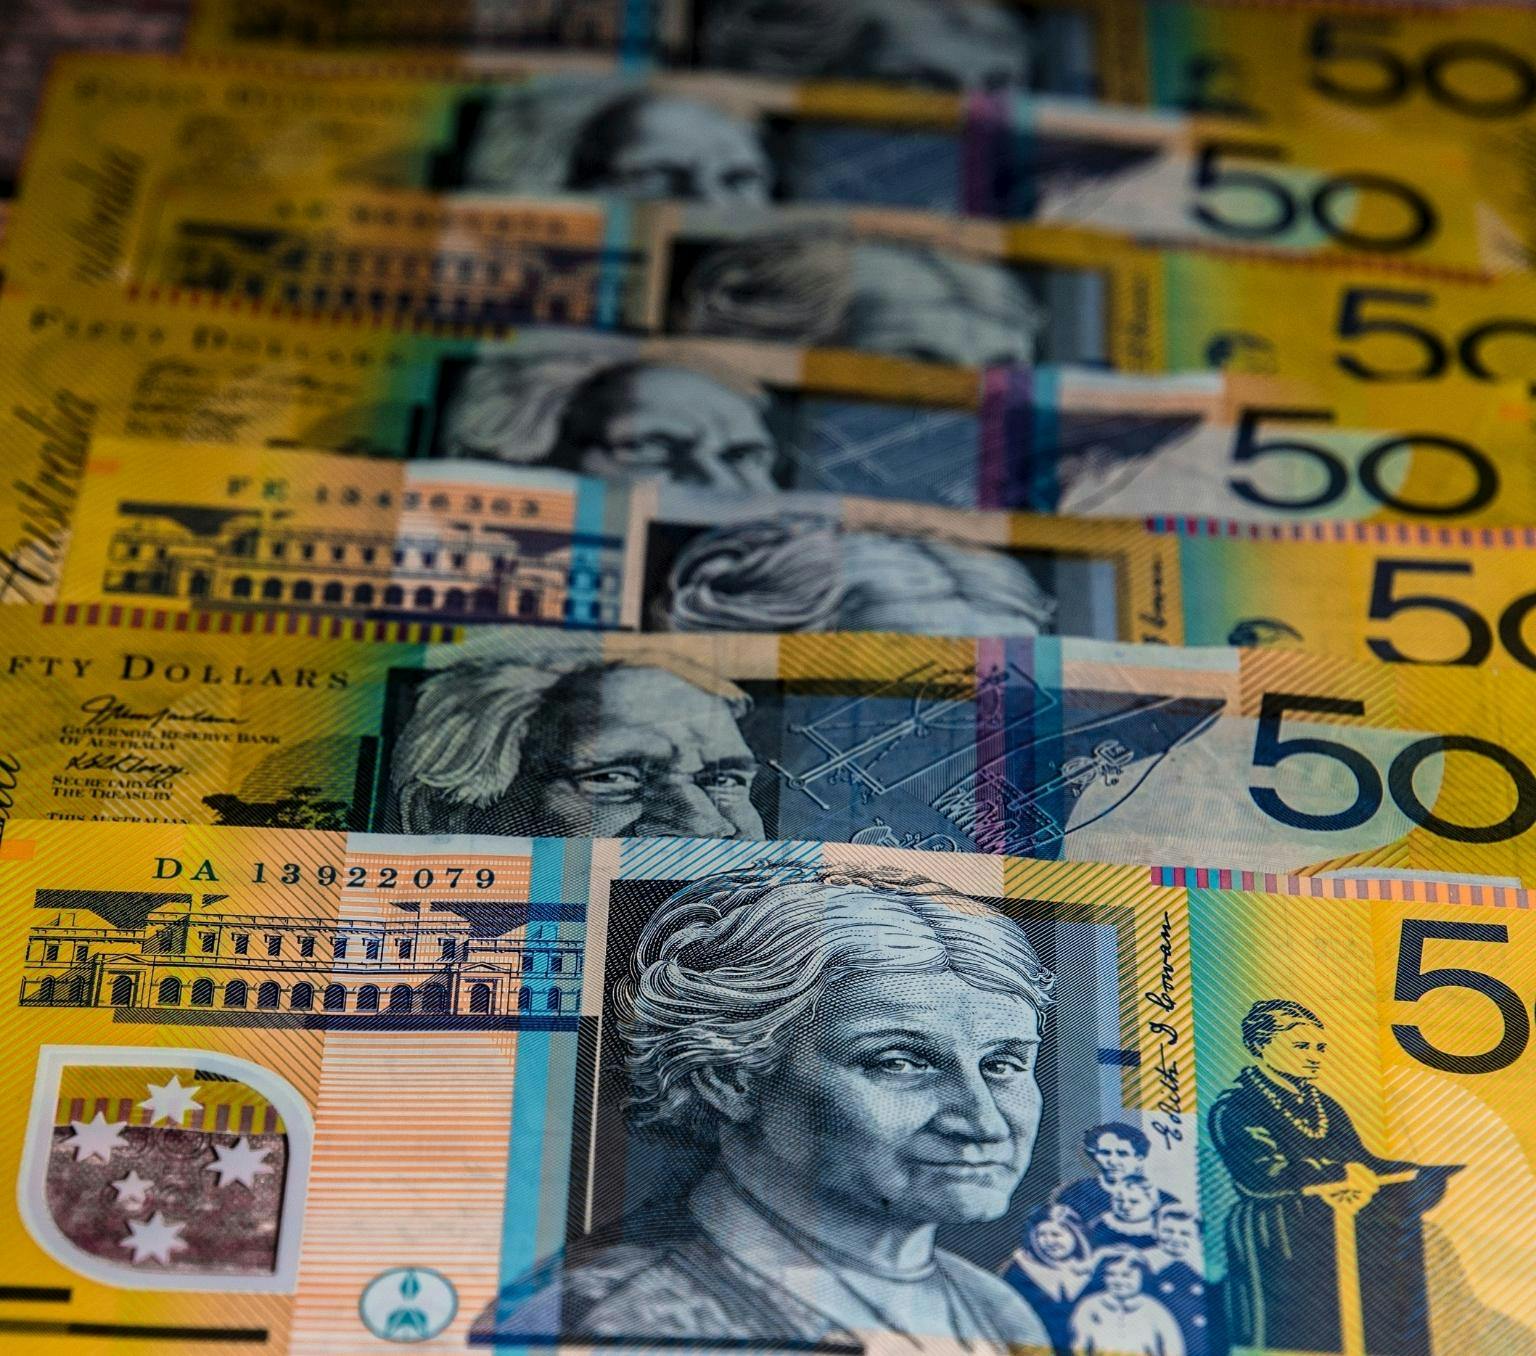 line of fifty dollar Australian bank notes. The notes are yellow and have a black and white image of a woman.